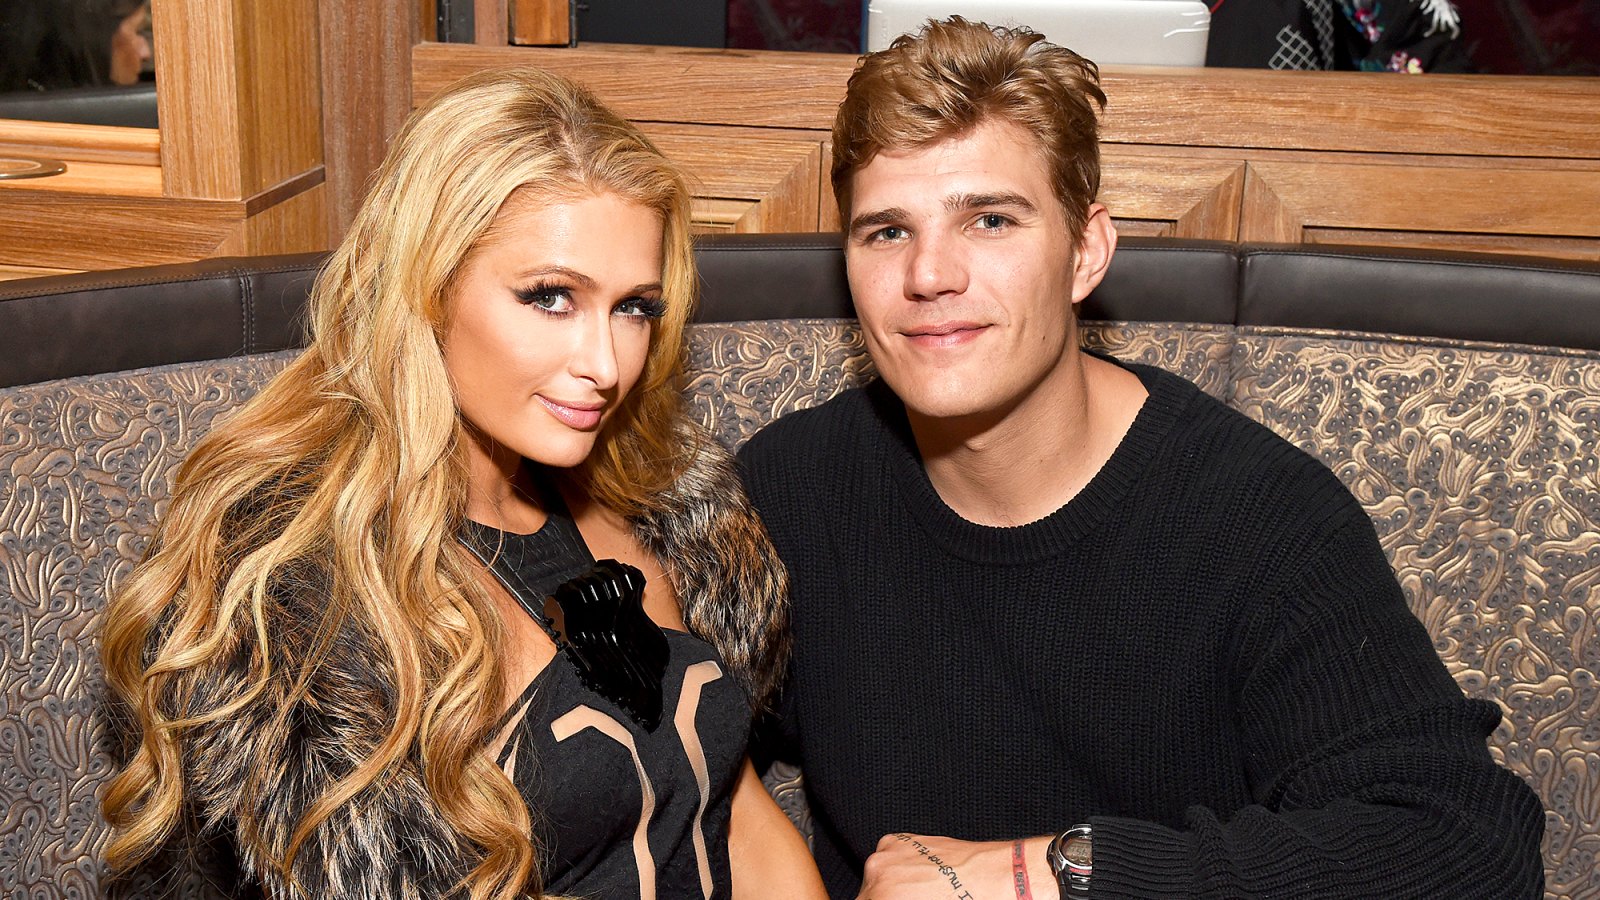 Paris Hilton and Chris Zylka attends day three of TAO, Beauty & Essex, Avenue and Luchini LA Grand Opening on March 18, 2017 in Los Angeles, California.